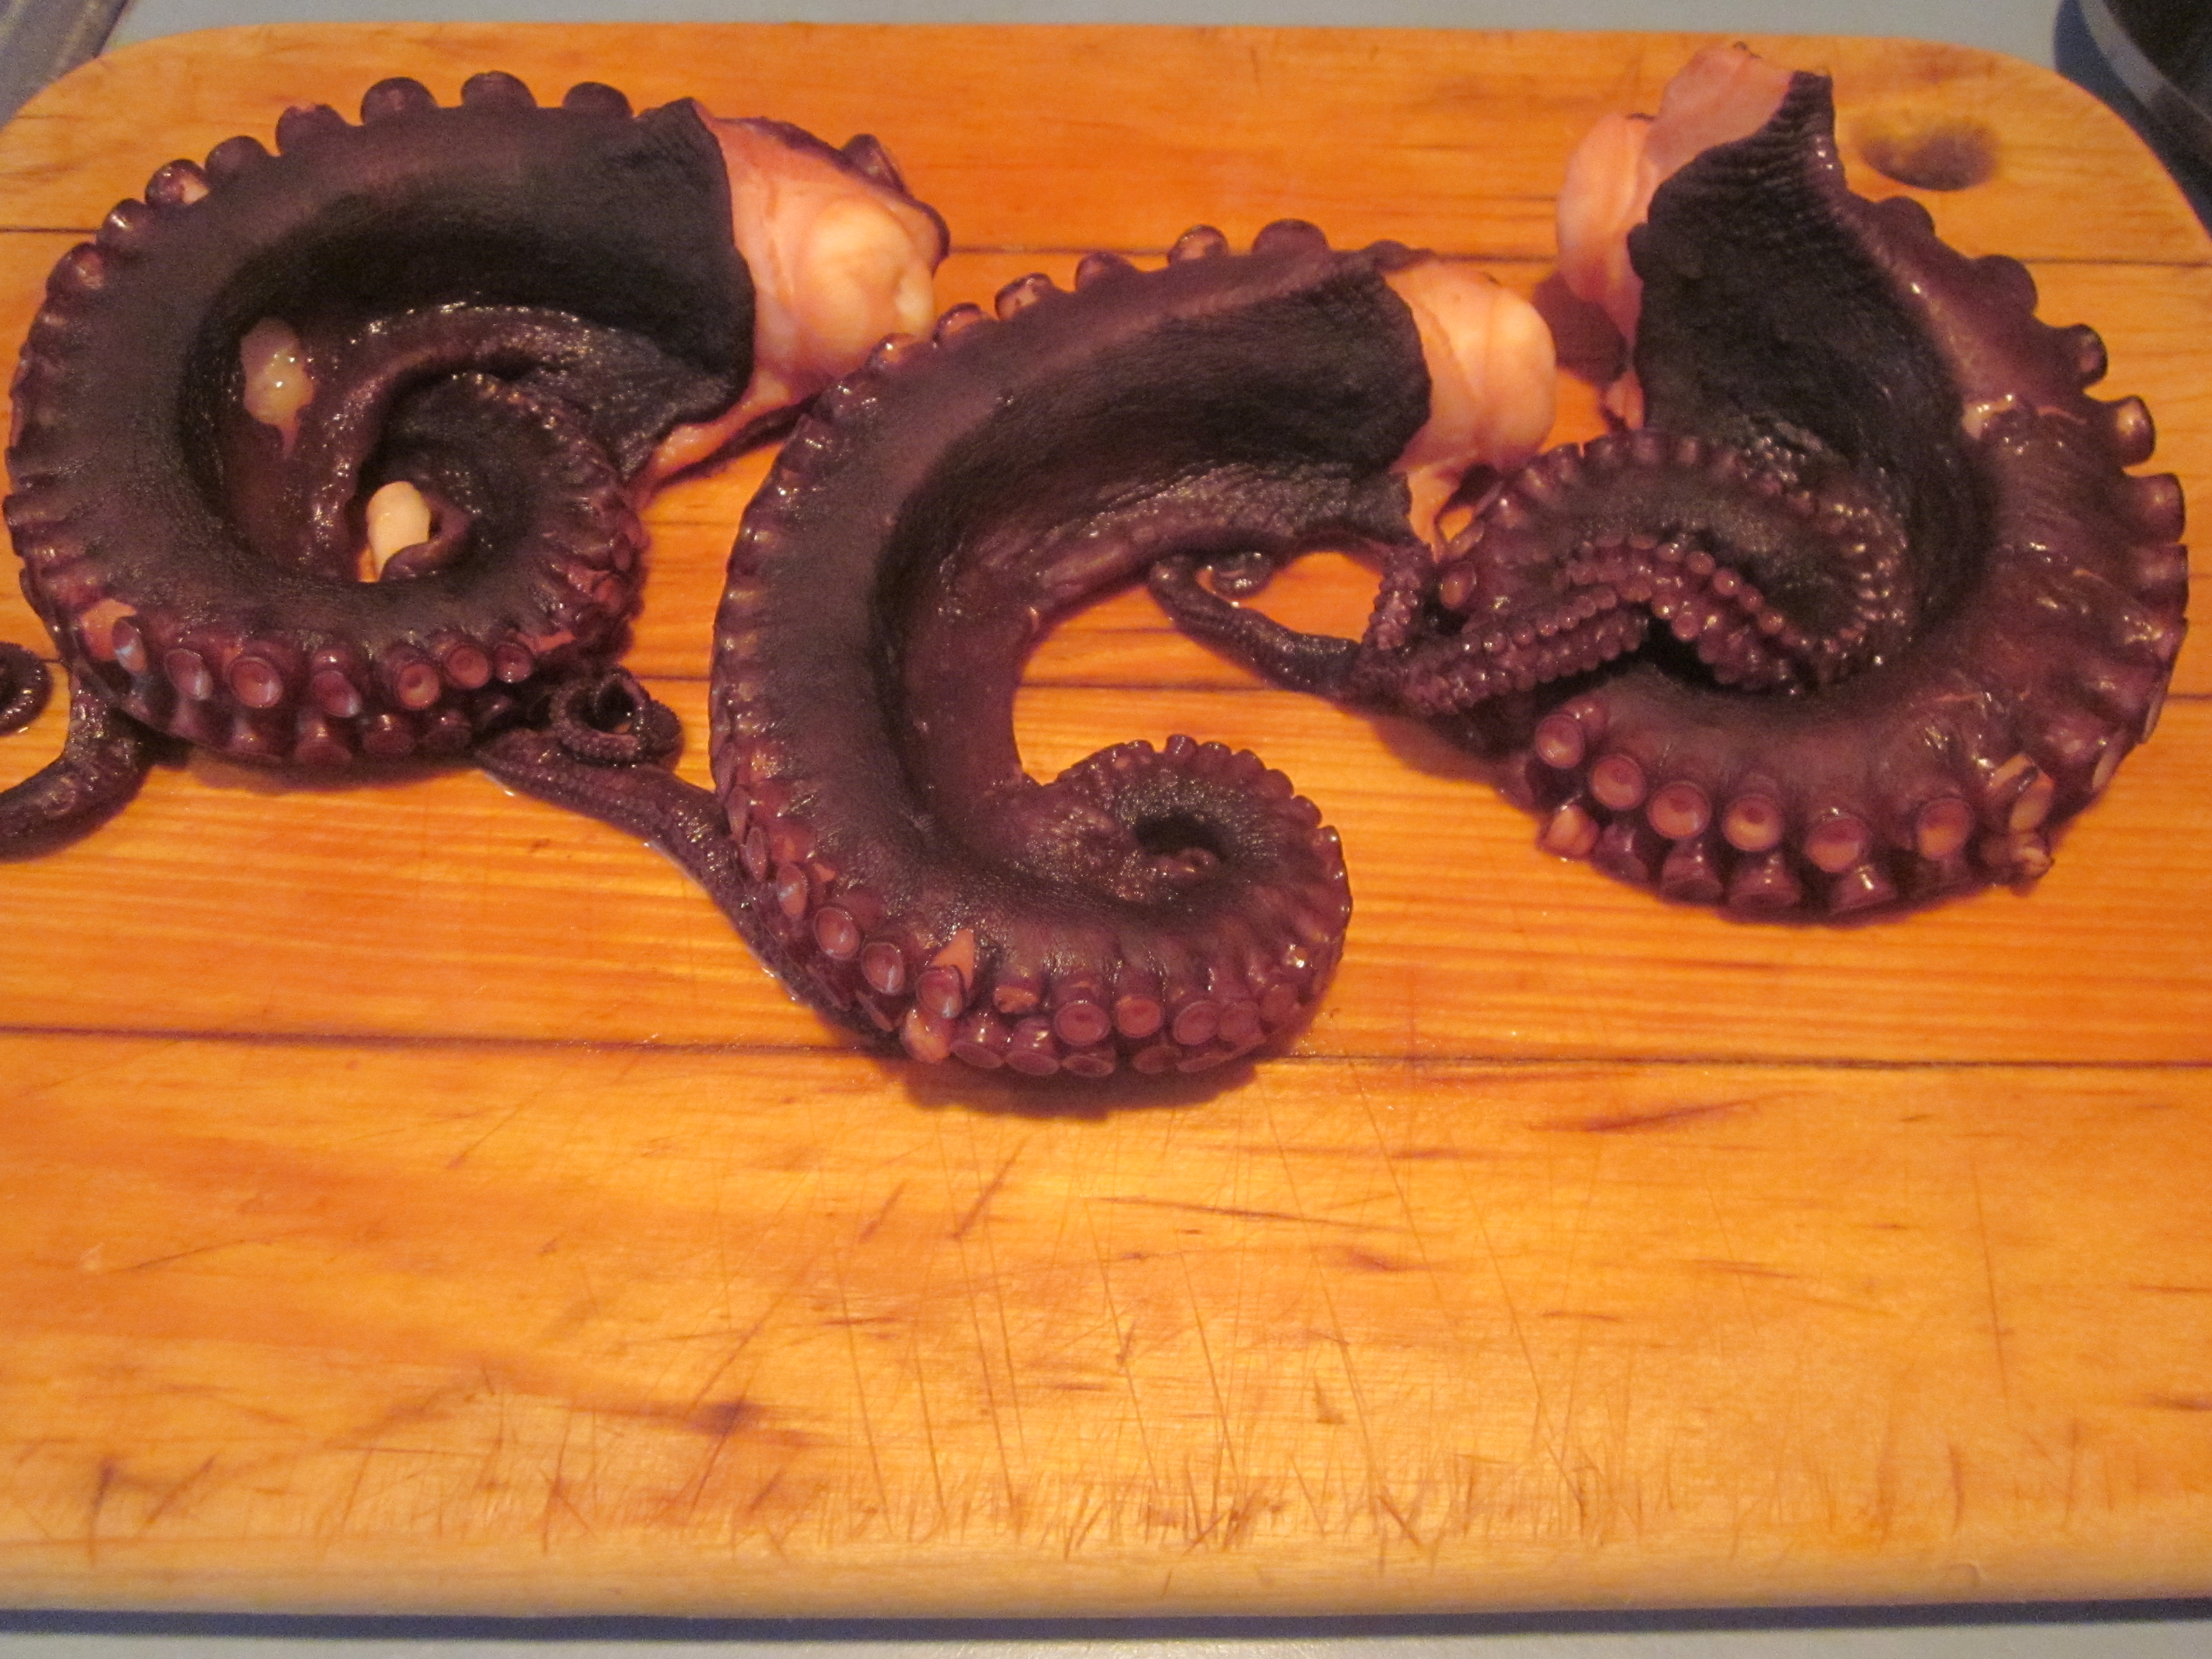 Octopus braised, ready to cook